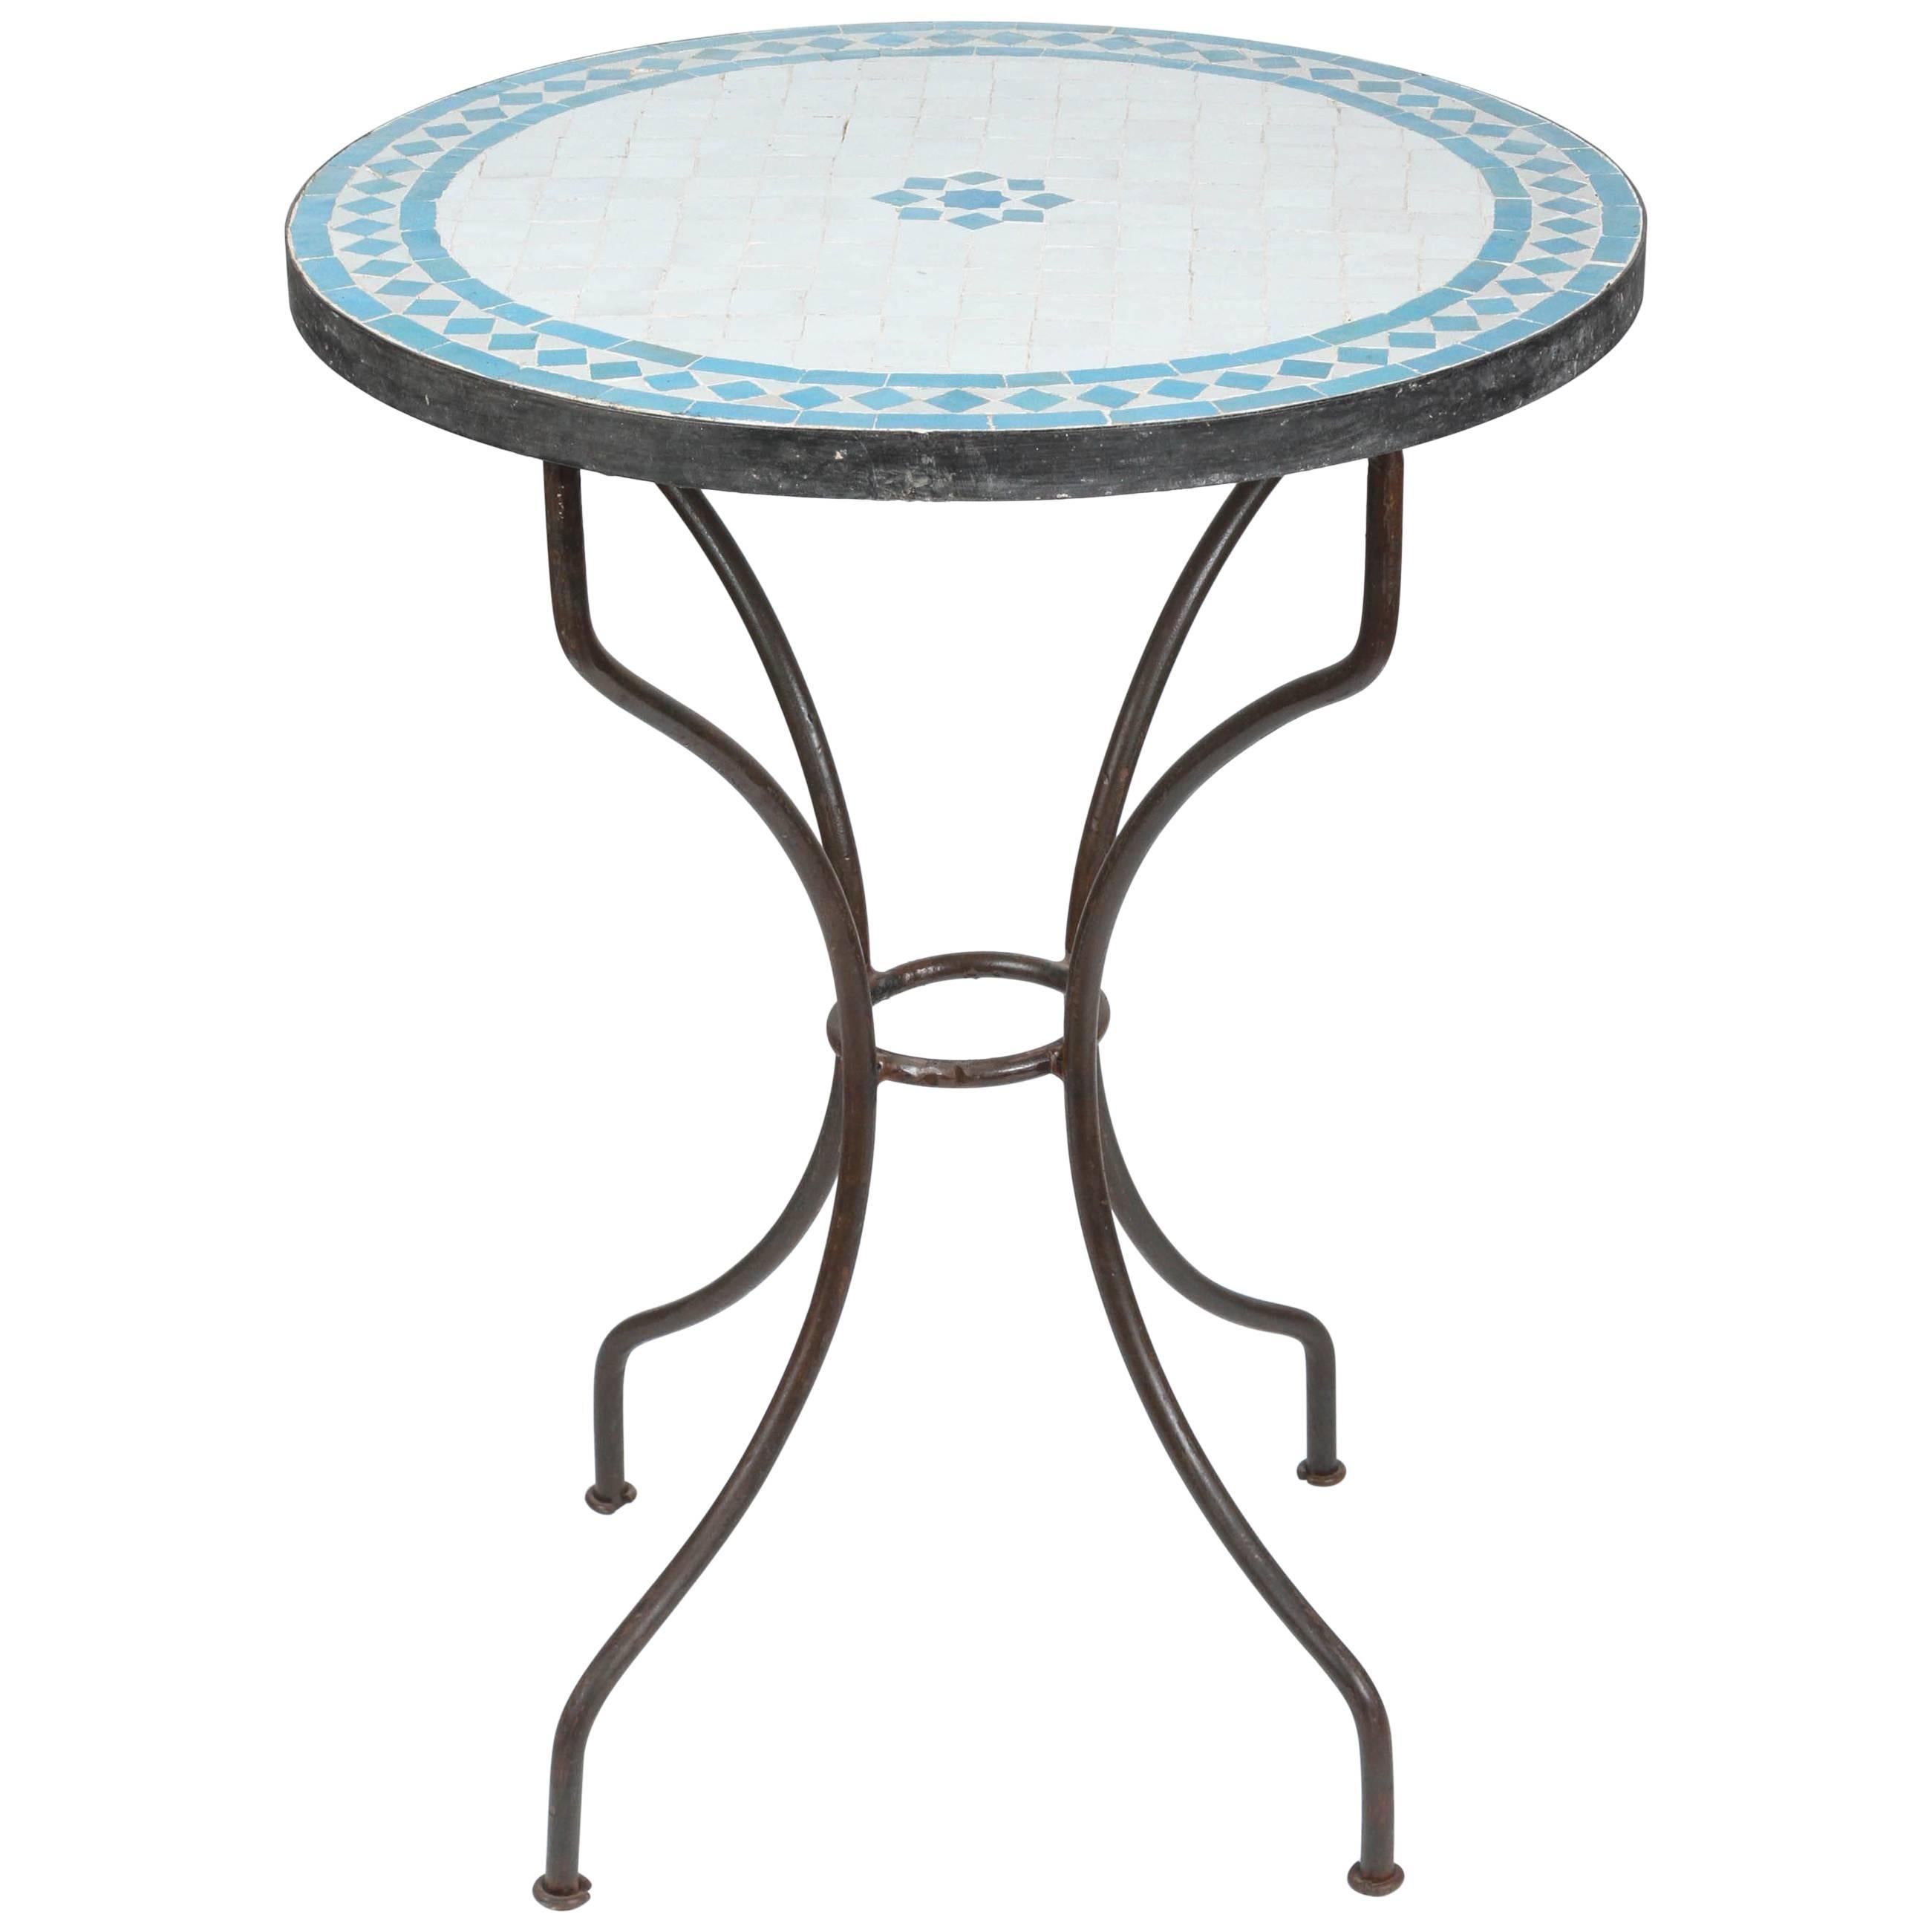 Moroccan Mosaic Turquoise Blue Tile Bistro Table Iron Base